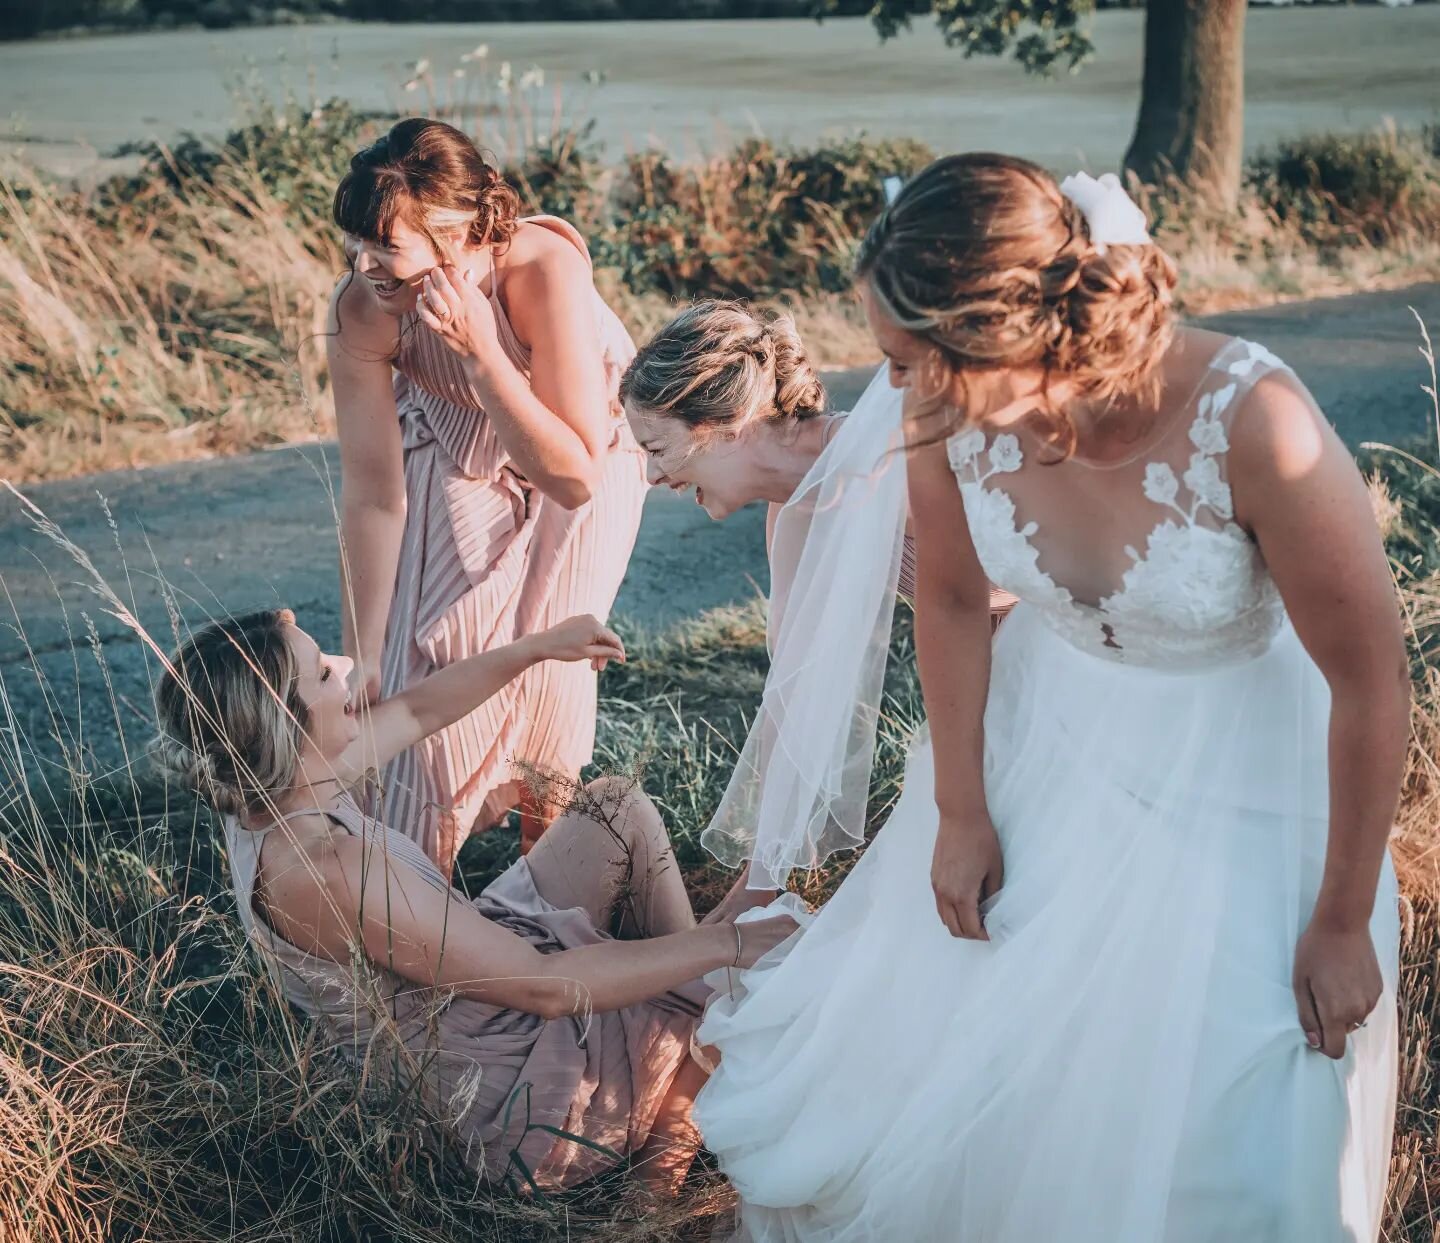 The time one of Charlotte's bridesmaids fell into a field so I went to help her up but Charlotte told me to put her back and take photos instead.

I dropped her where she fell and snapped away while everyone else pissed their pants